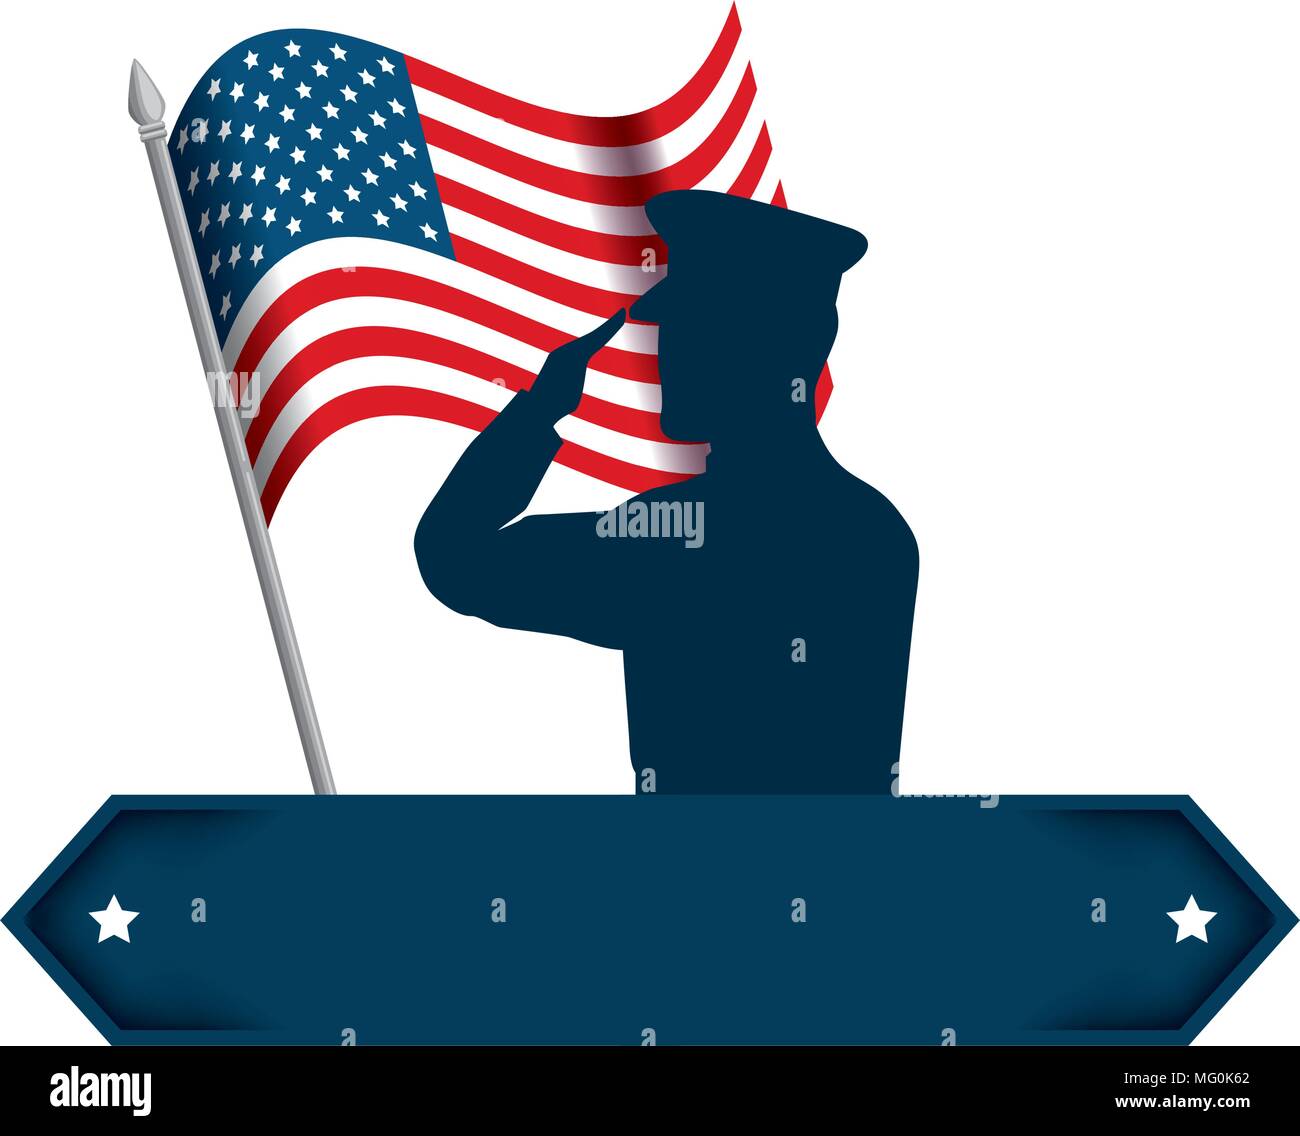 soldier saluting flag clipart